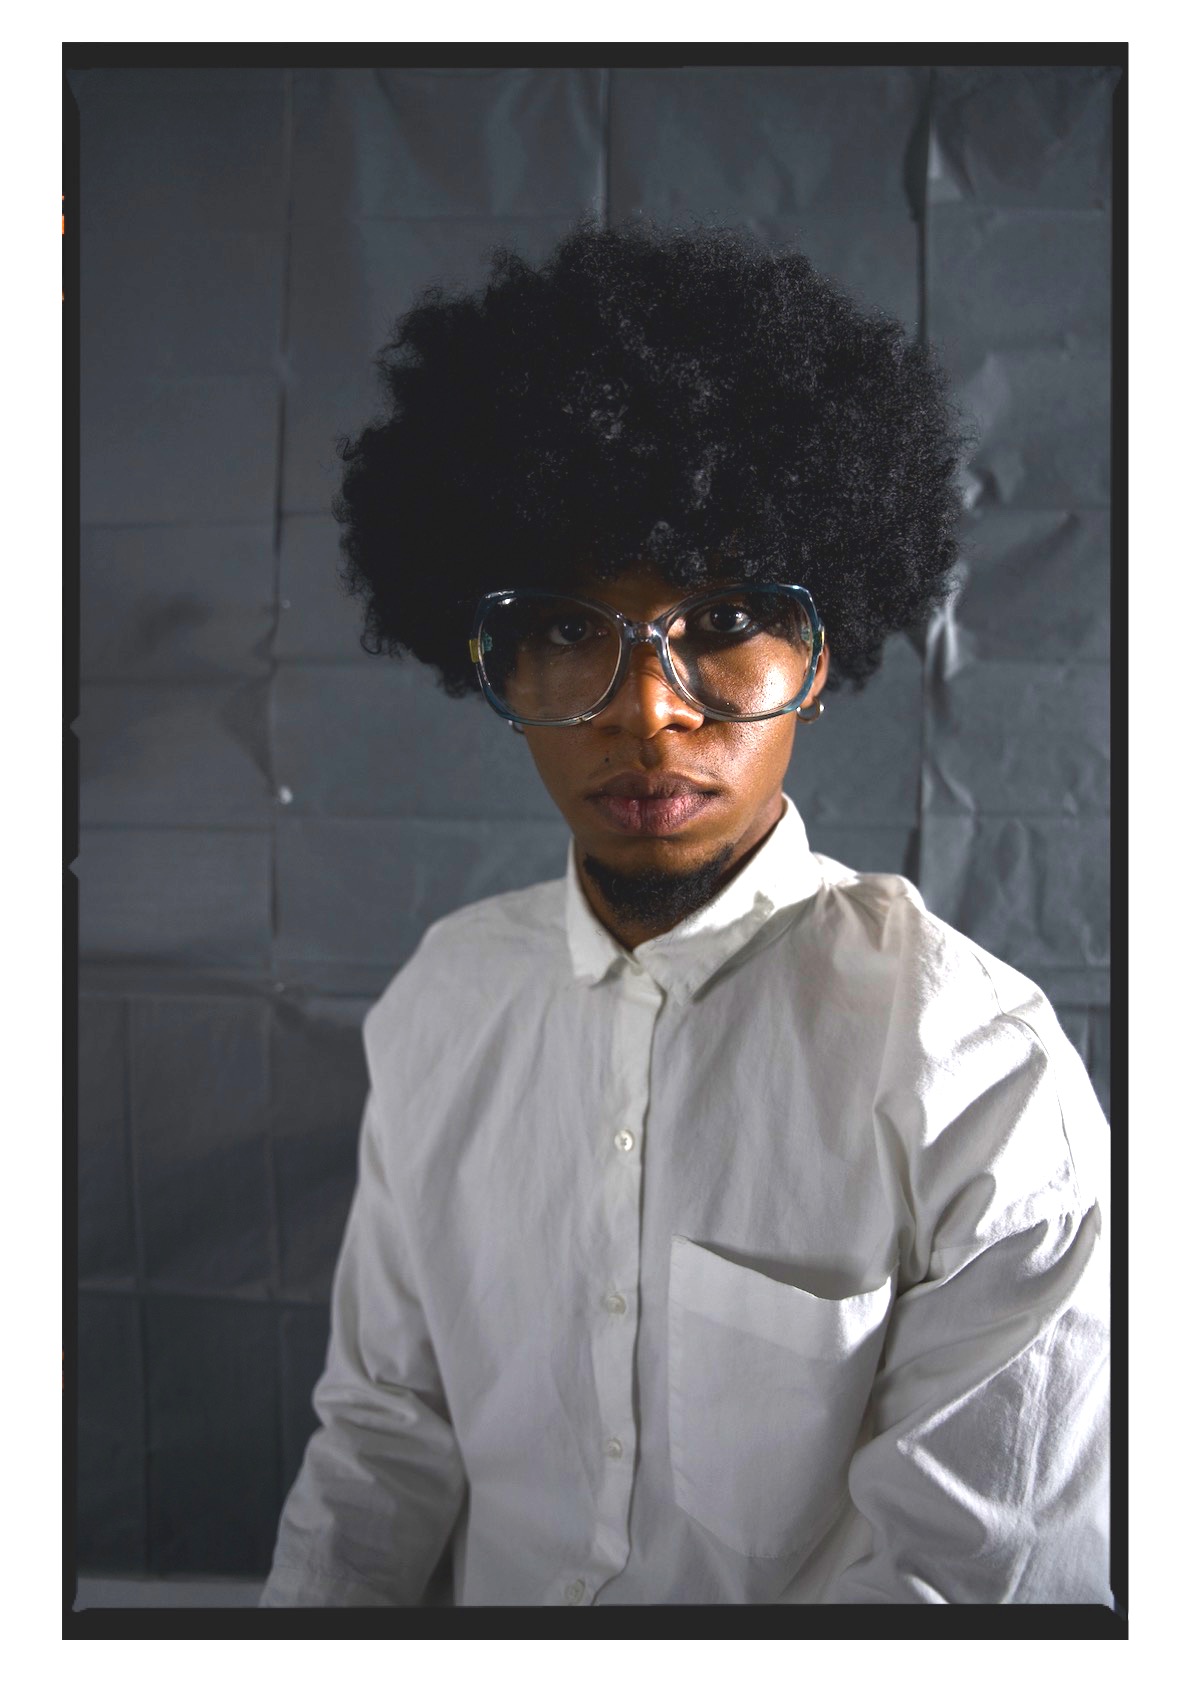 K.Skits wears an afro symbolising blackness and a white shirt as commentary on the sanitisation of blackness he says artists are often cornered into by the palatability requirements of the white gaze.